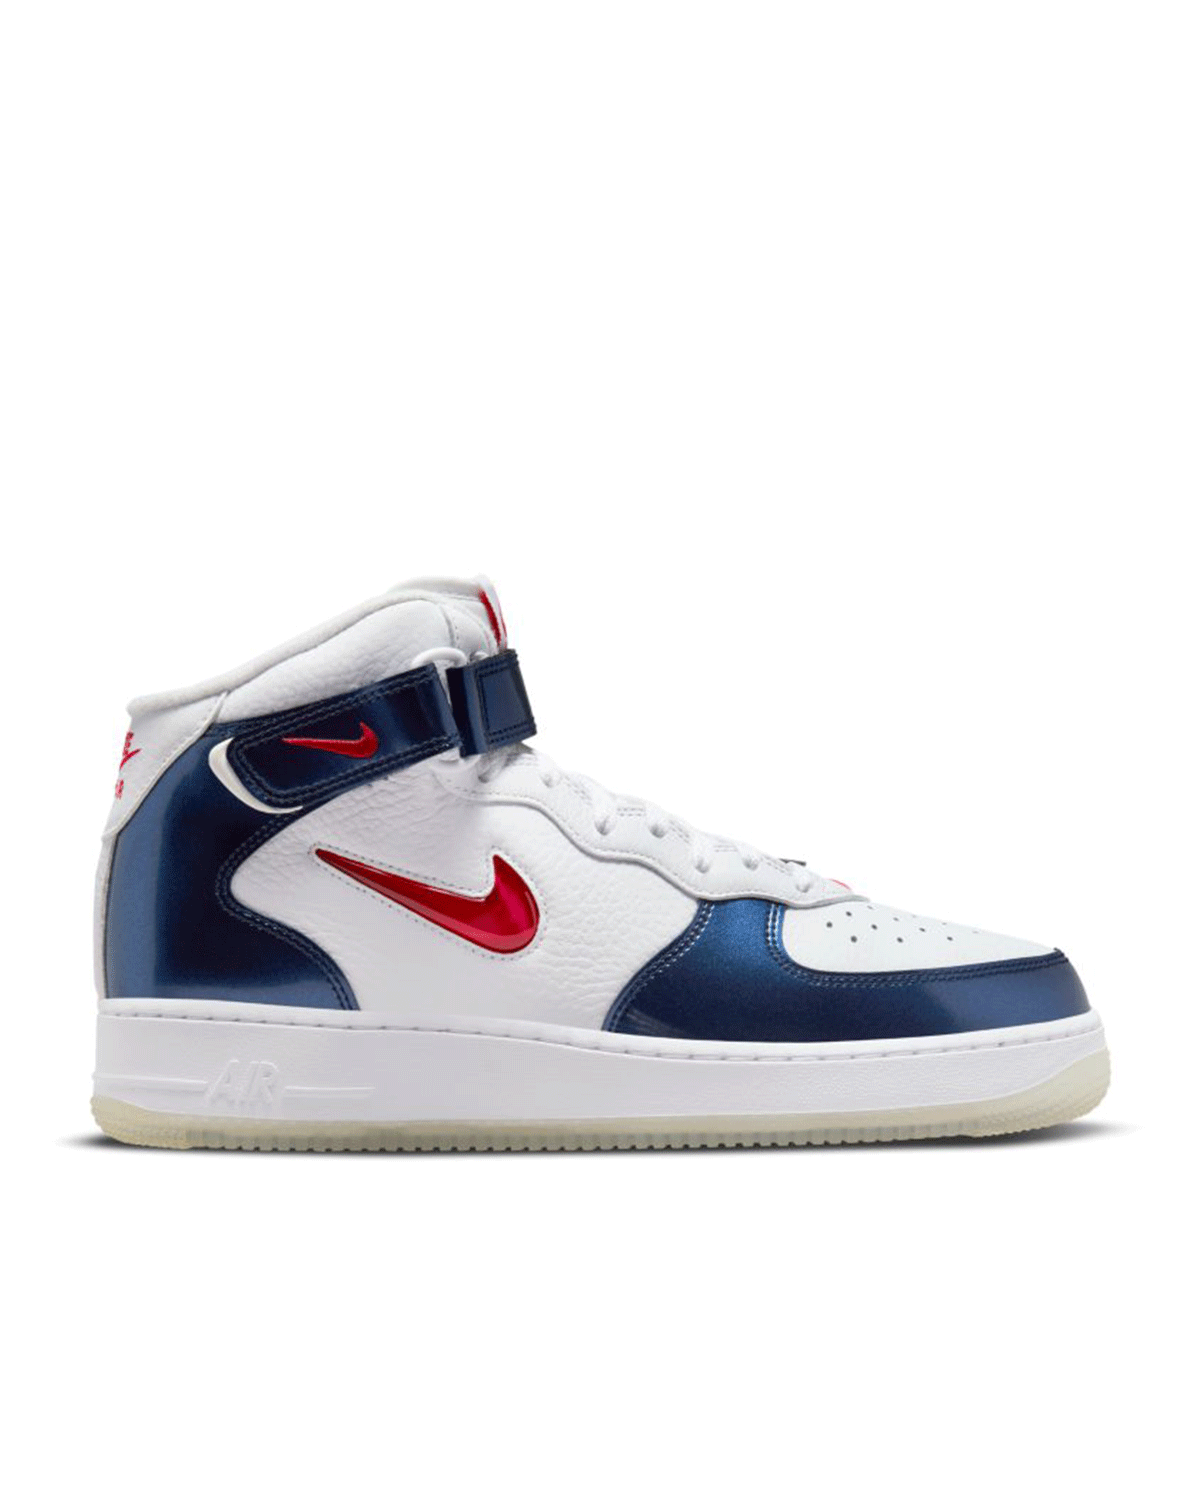 Air Force 1 Mid QS White/University Red/Midnight Navy 8.5 M